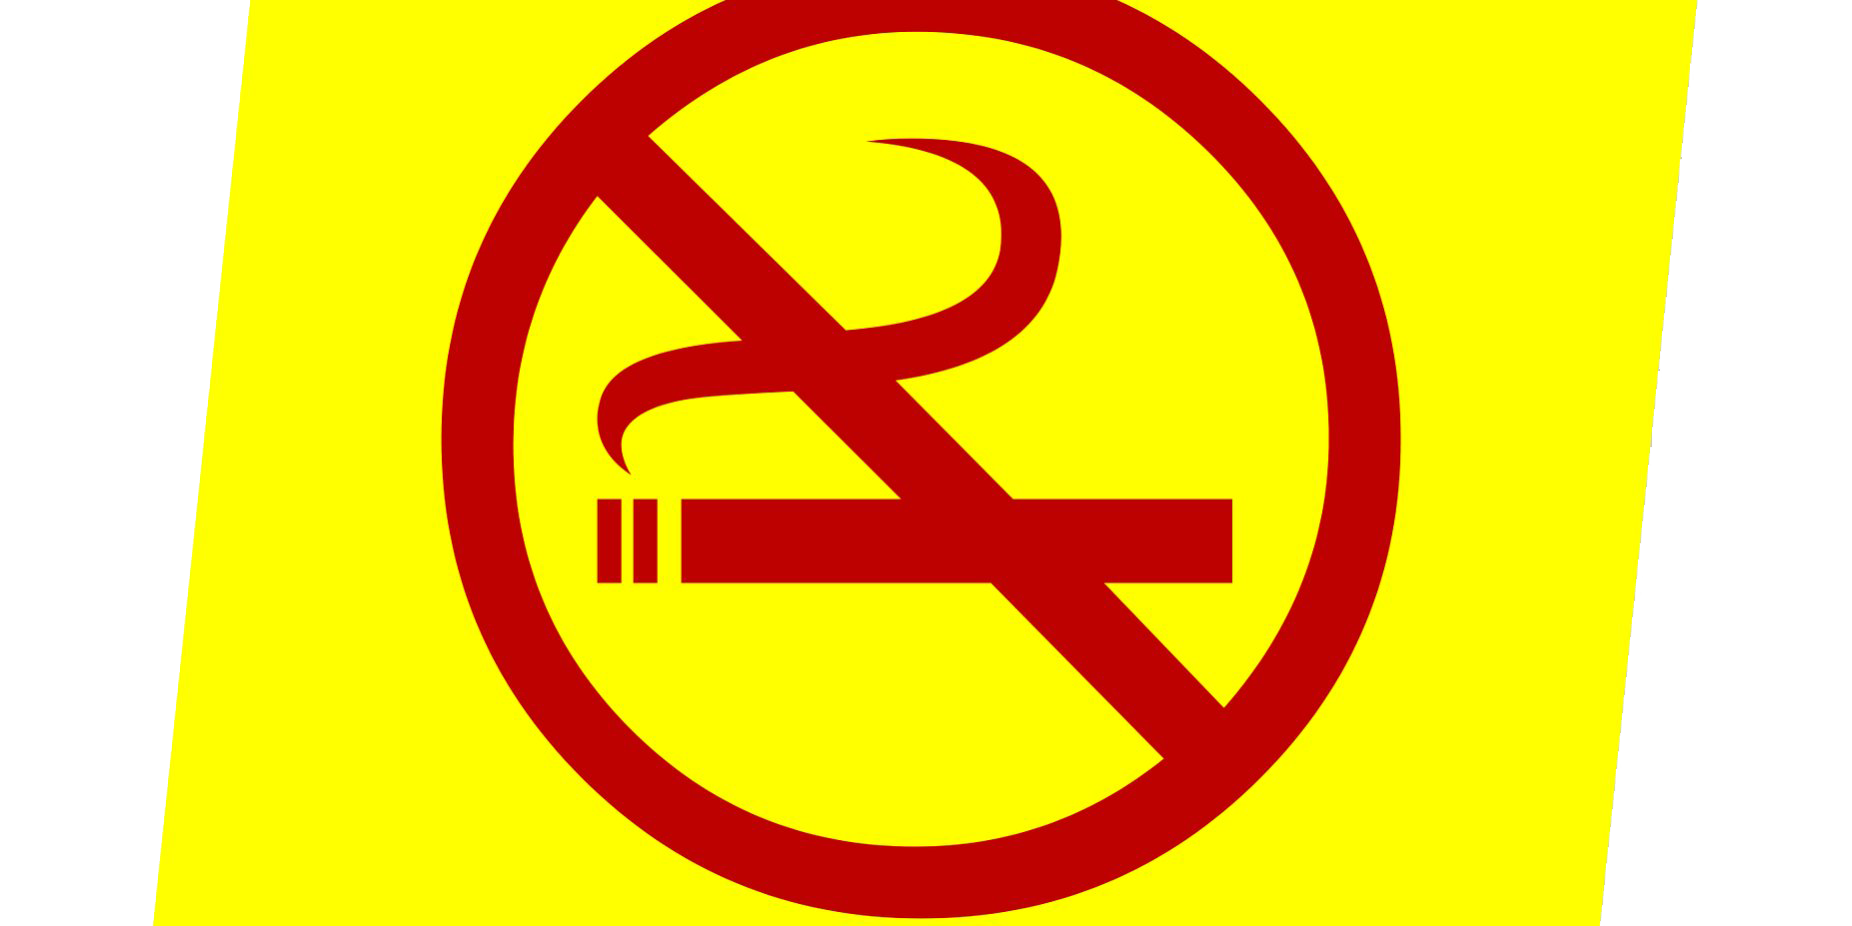 World Day Tobacco No Free Download PNG HD PNG Image